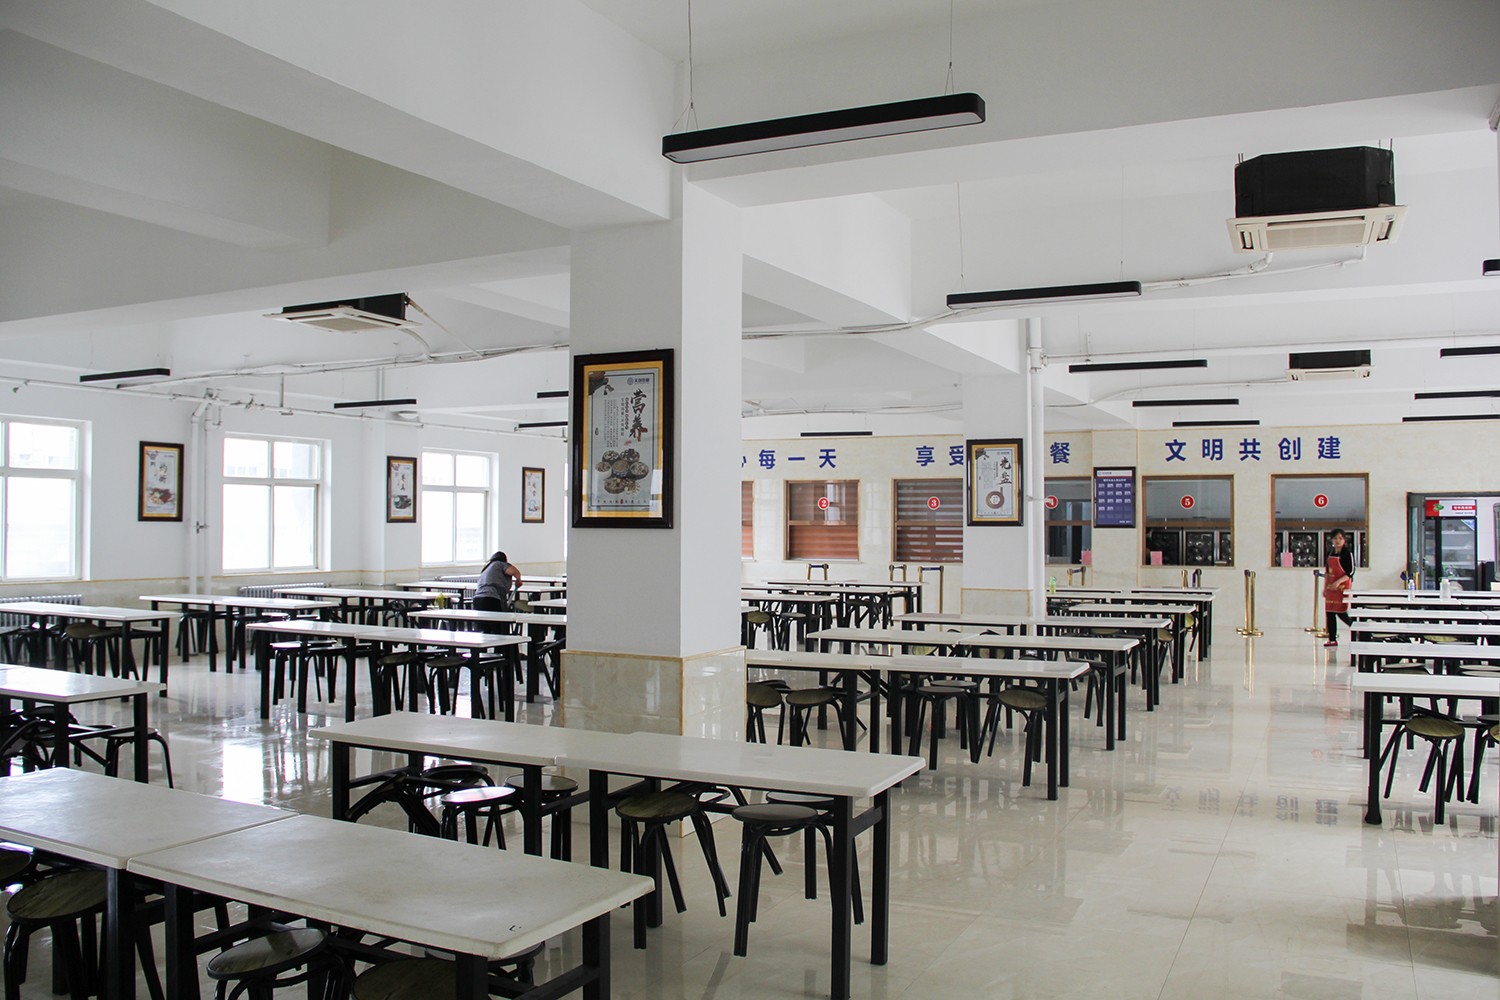 Clean dining environment